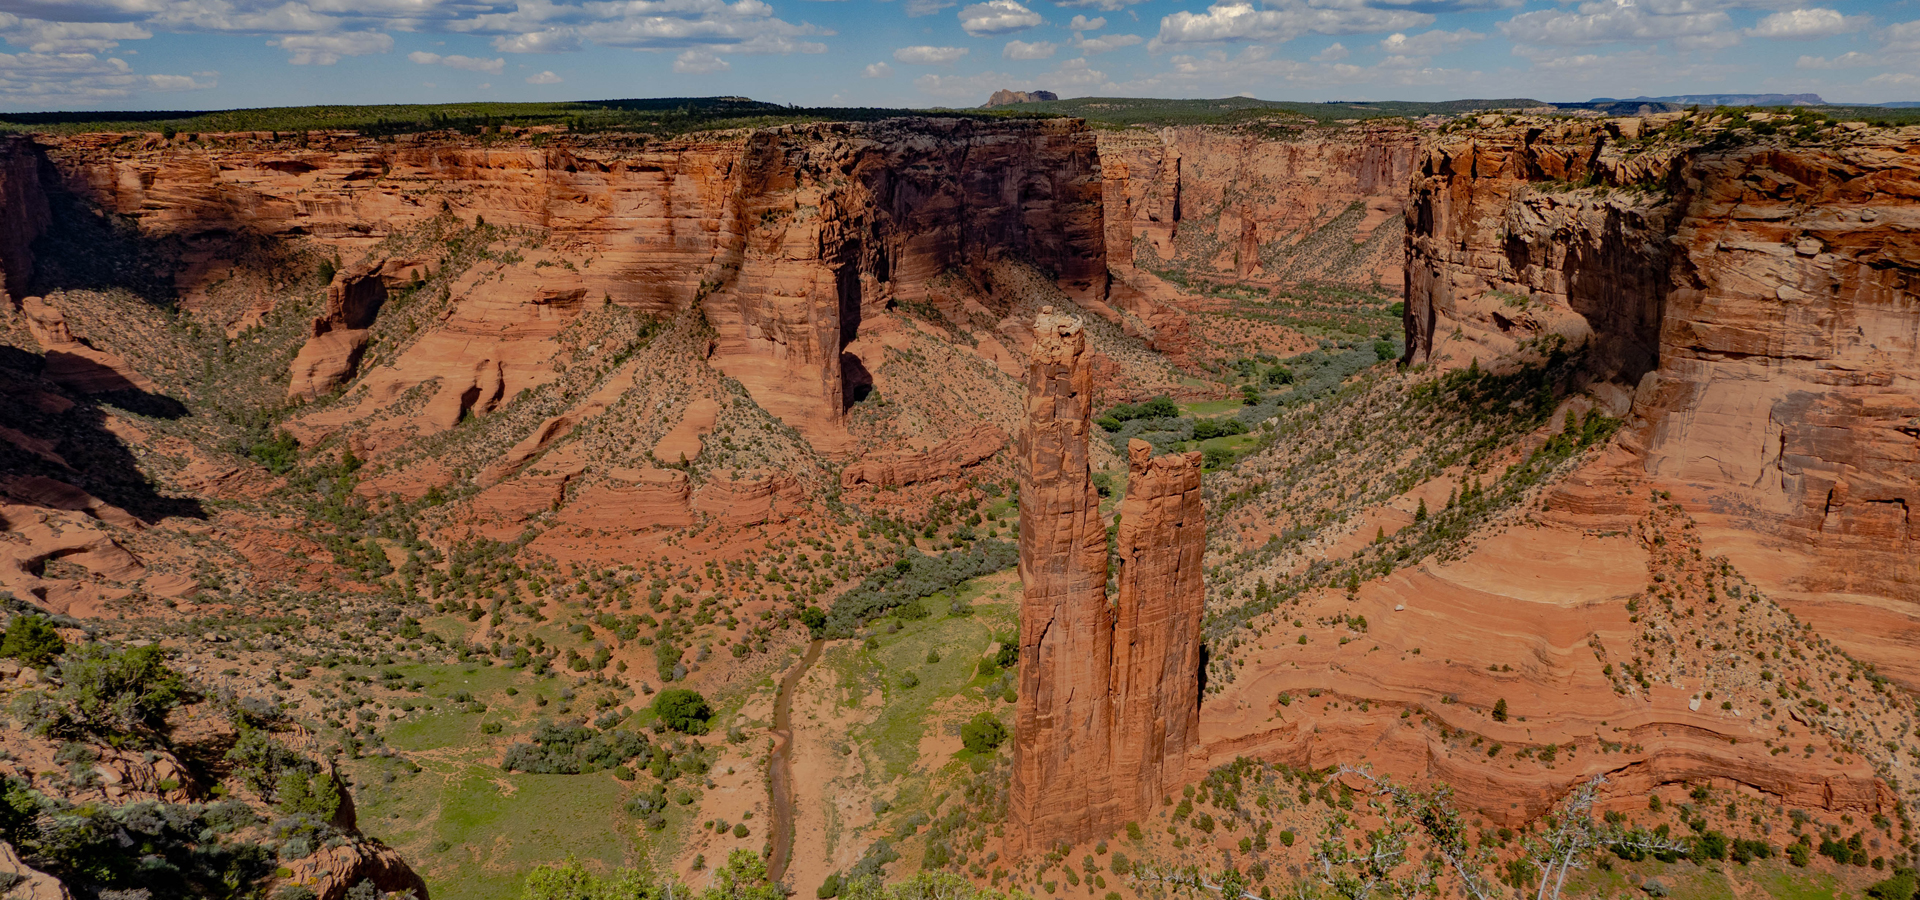 Curious in Canyon de Chelly